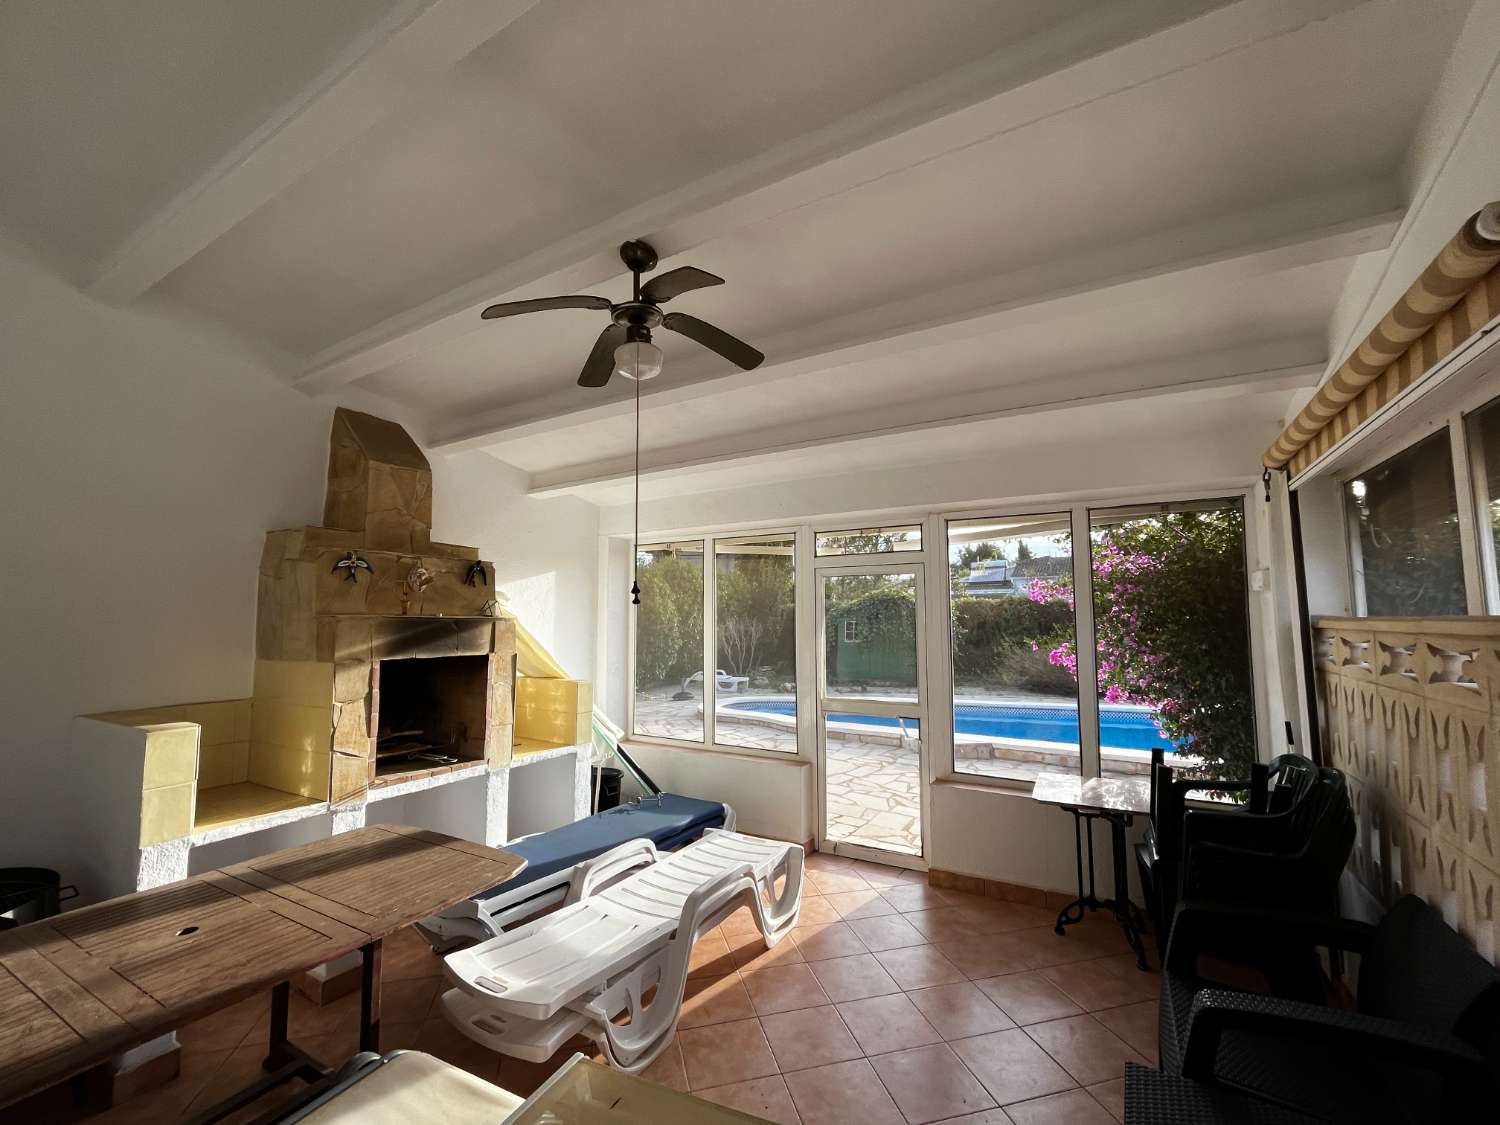 Beautiful villa with private pool in Les Tres Cales